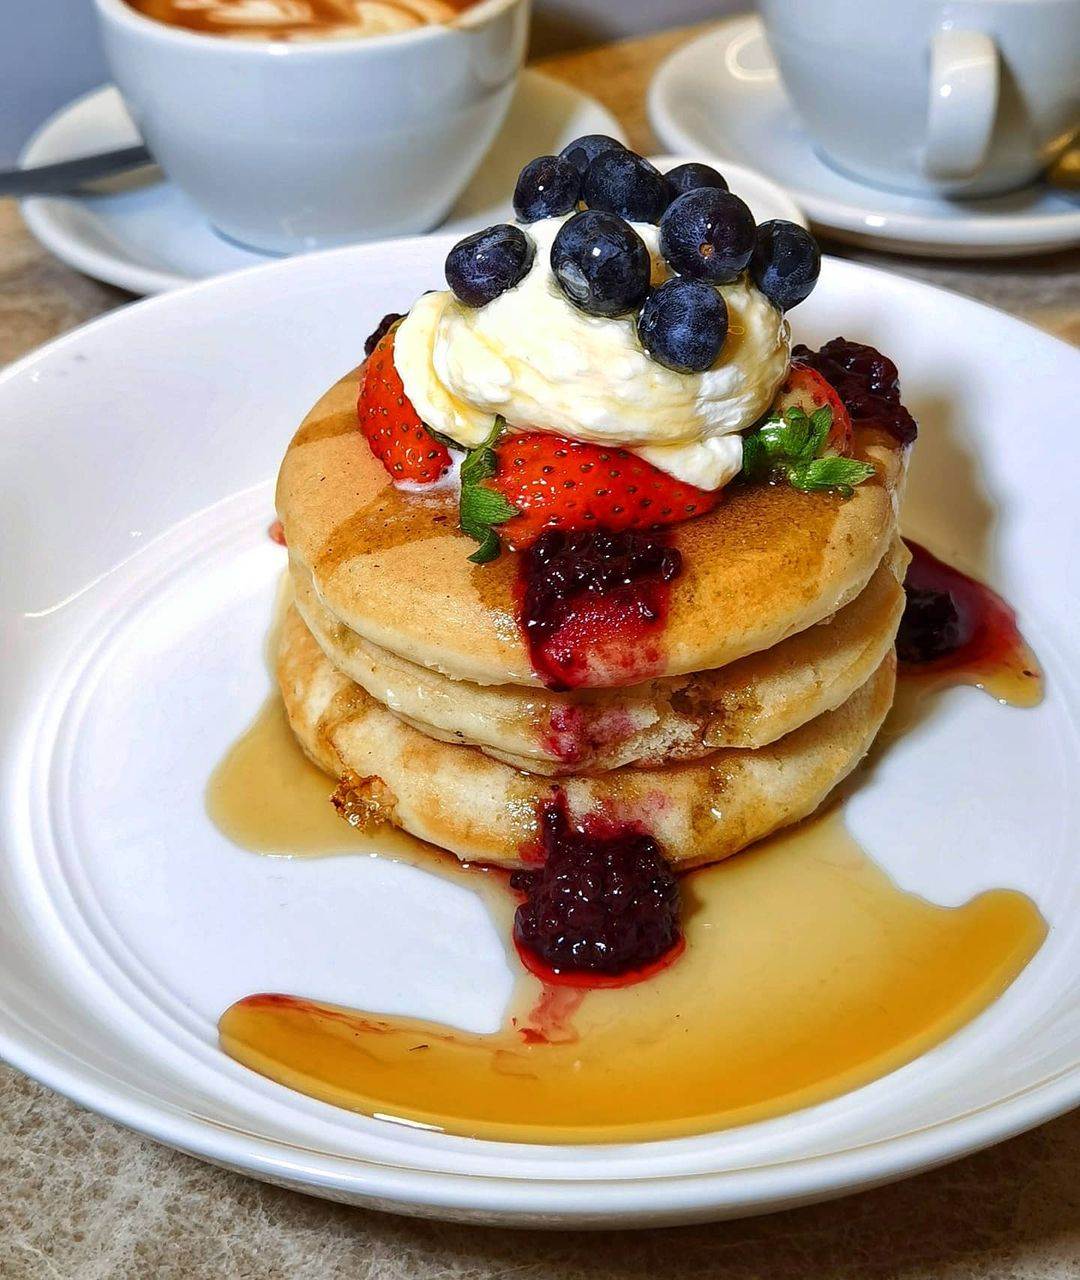 Halal cafes and resto in S'pore - pancakes